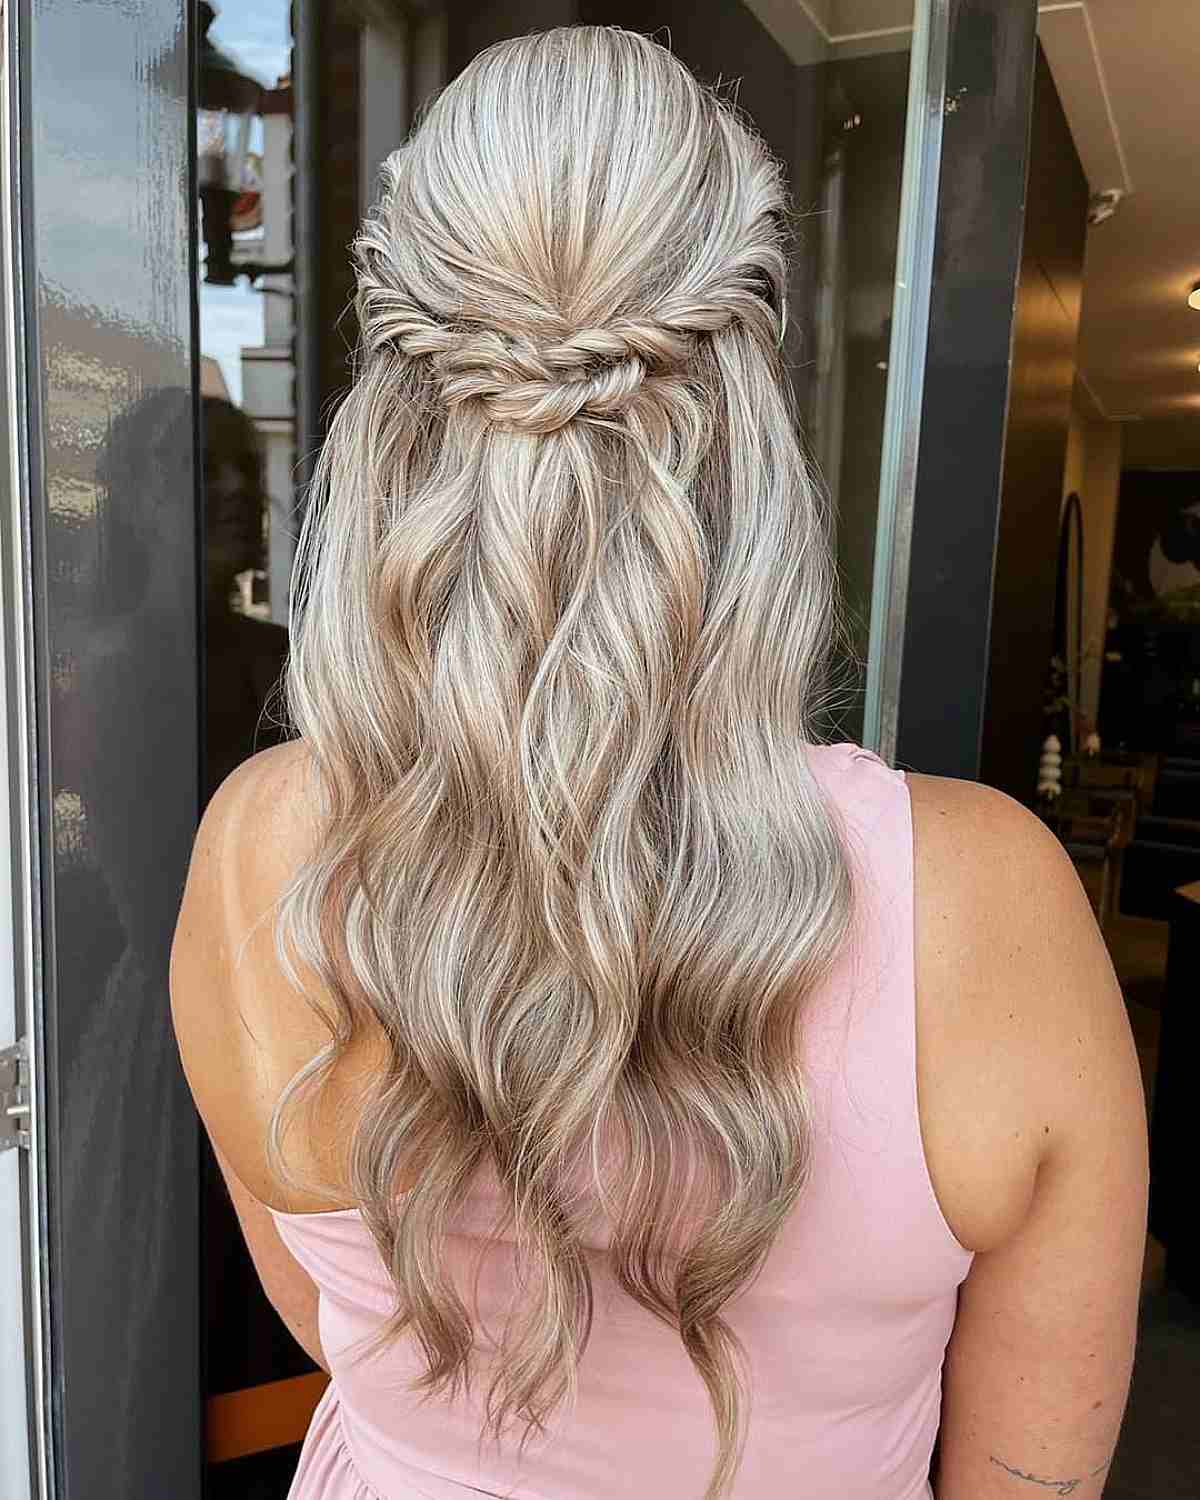 16 Bridal Hairstyles for Long Hair Fit for a Princess